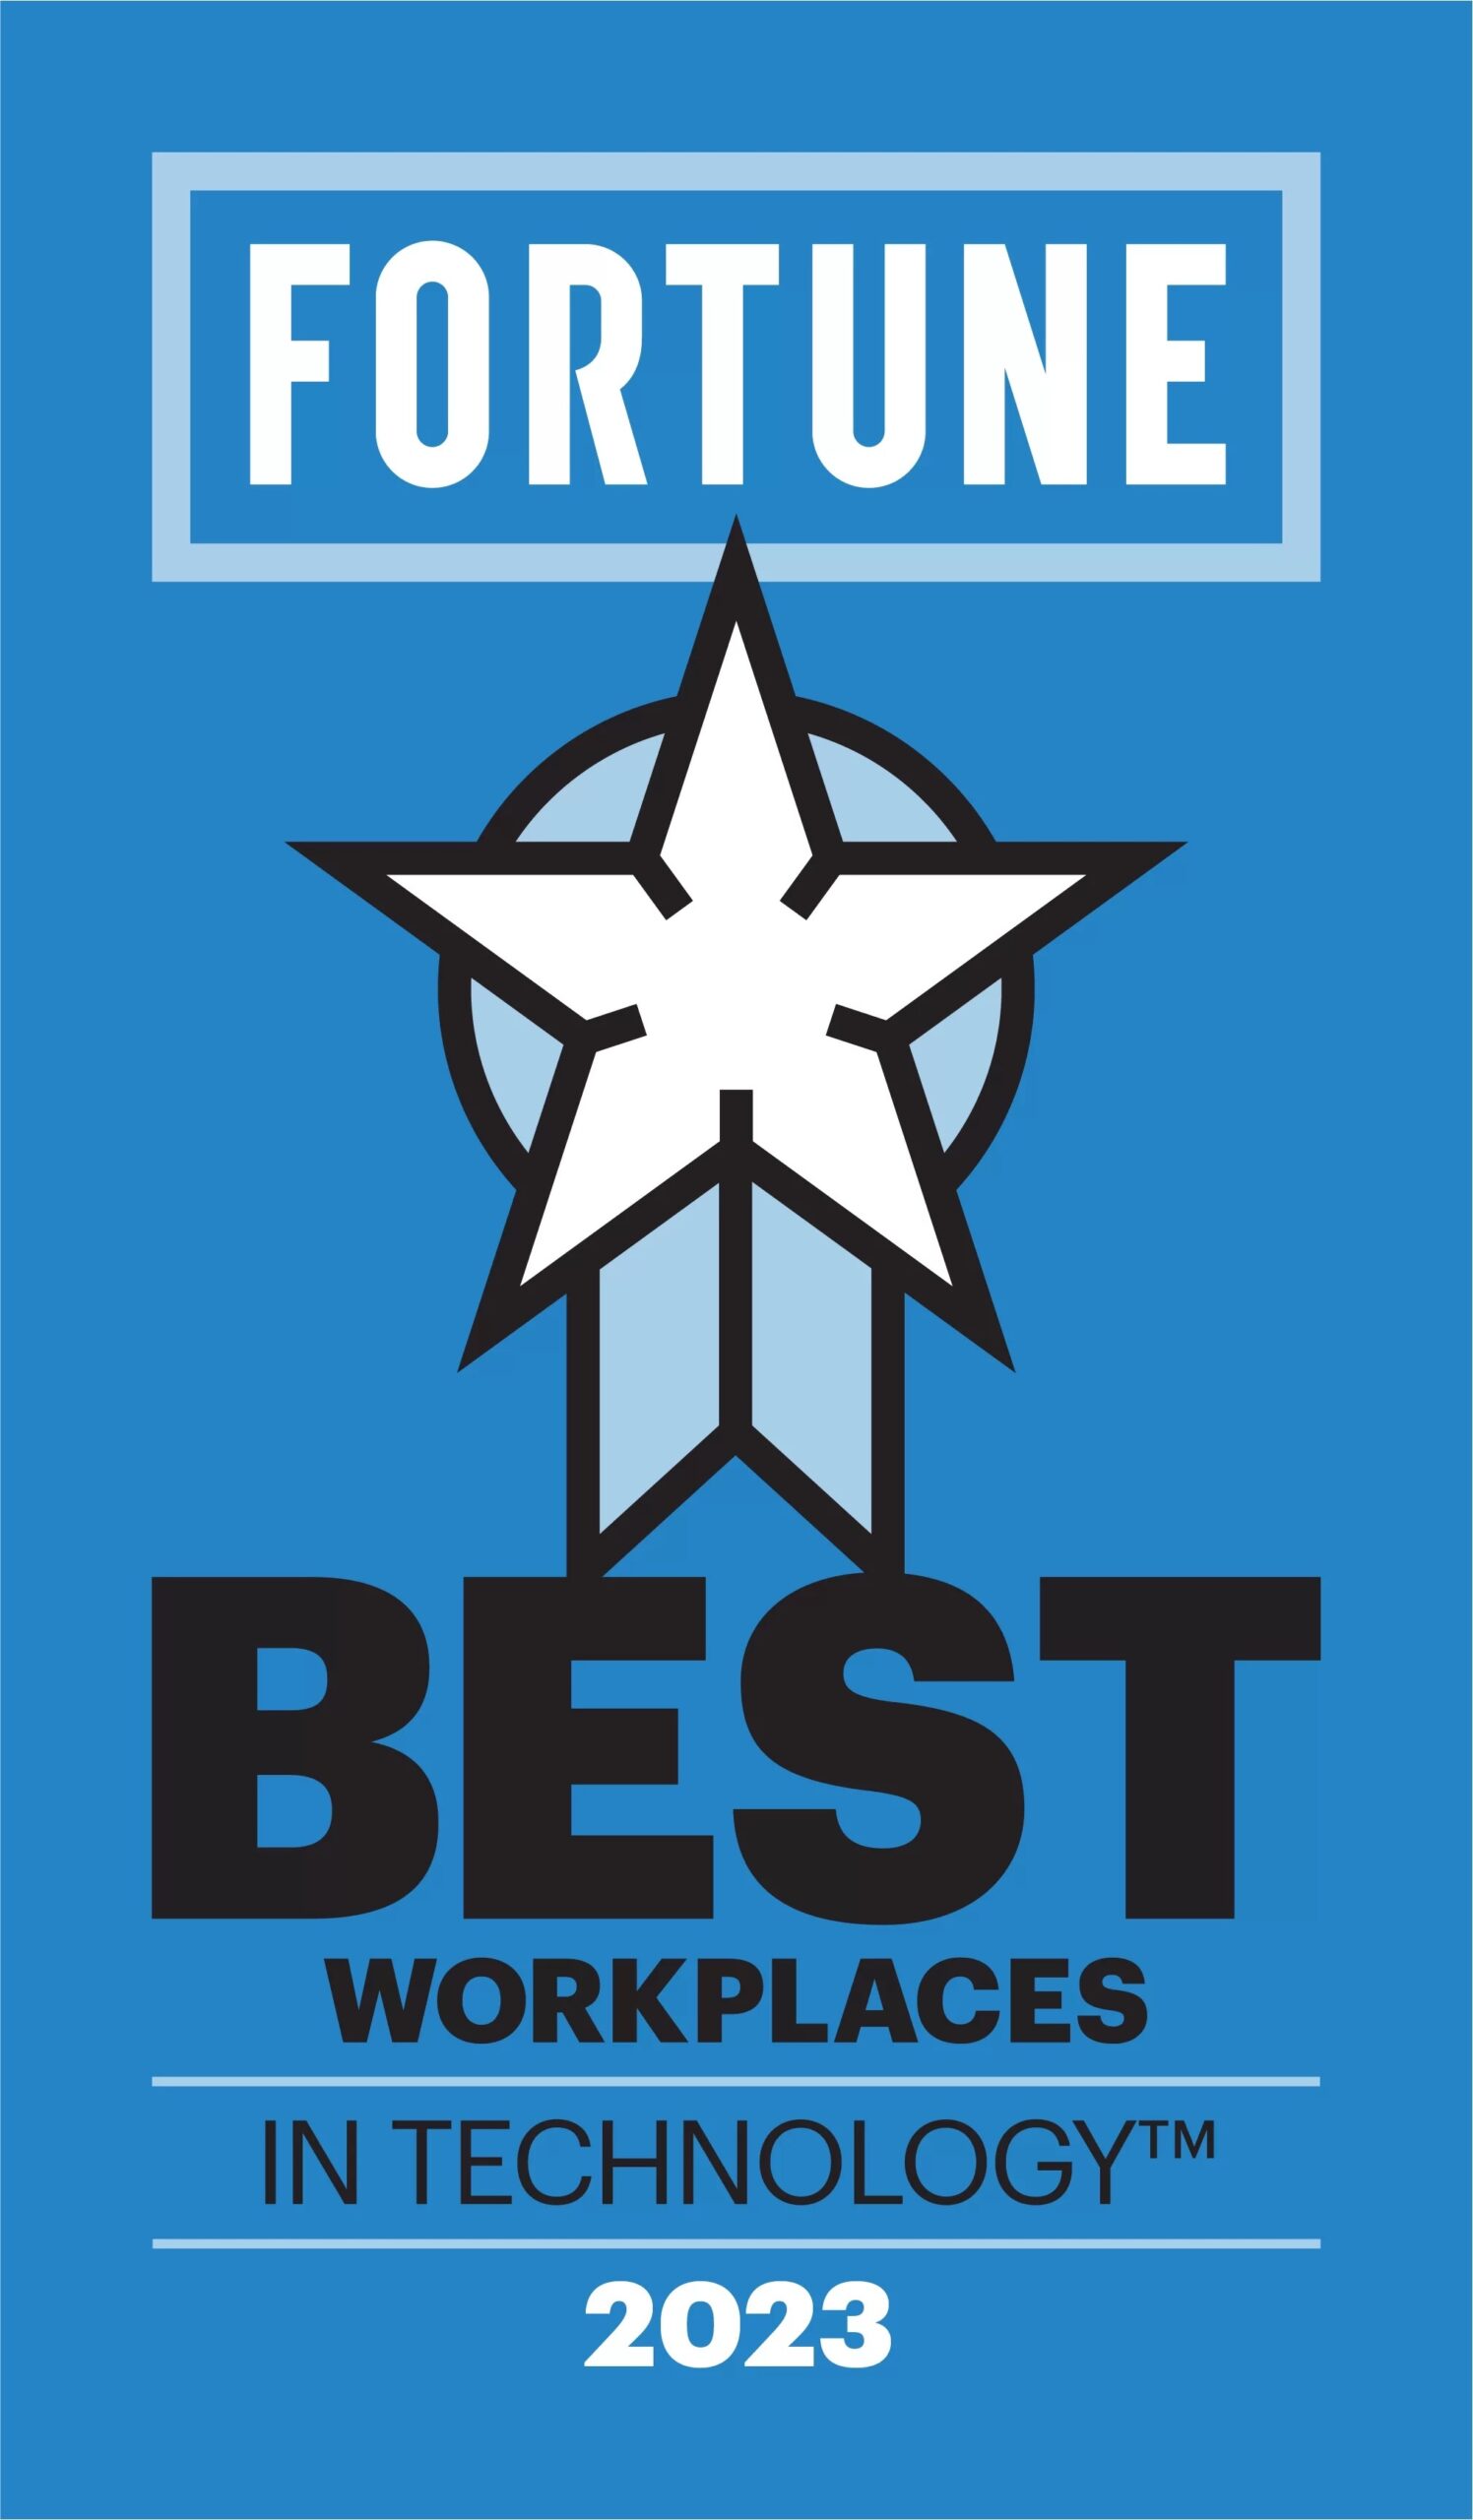 Fortune Best Workplaces in Technology 2023